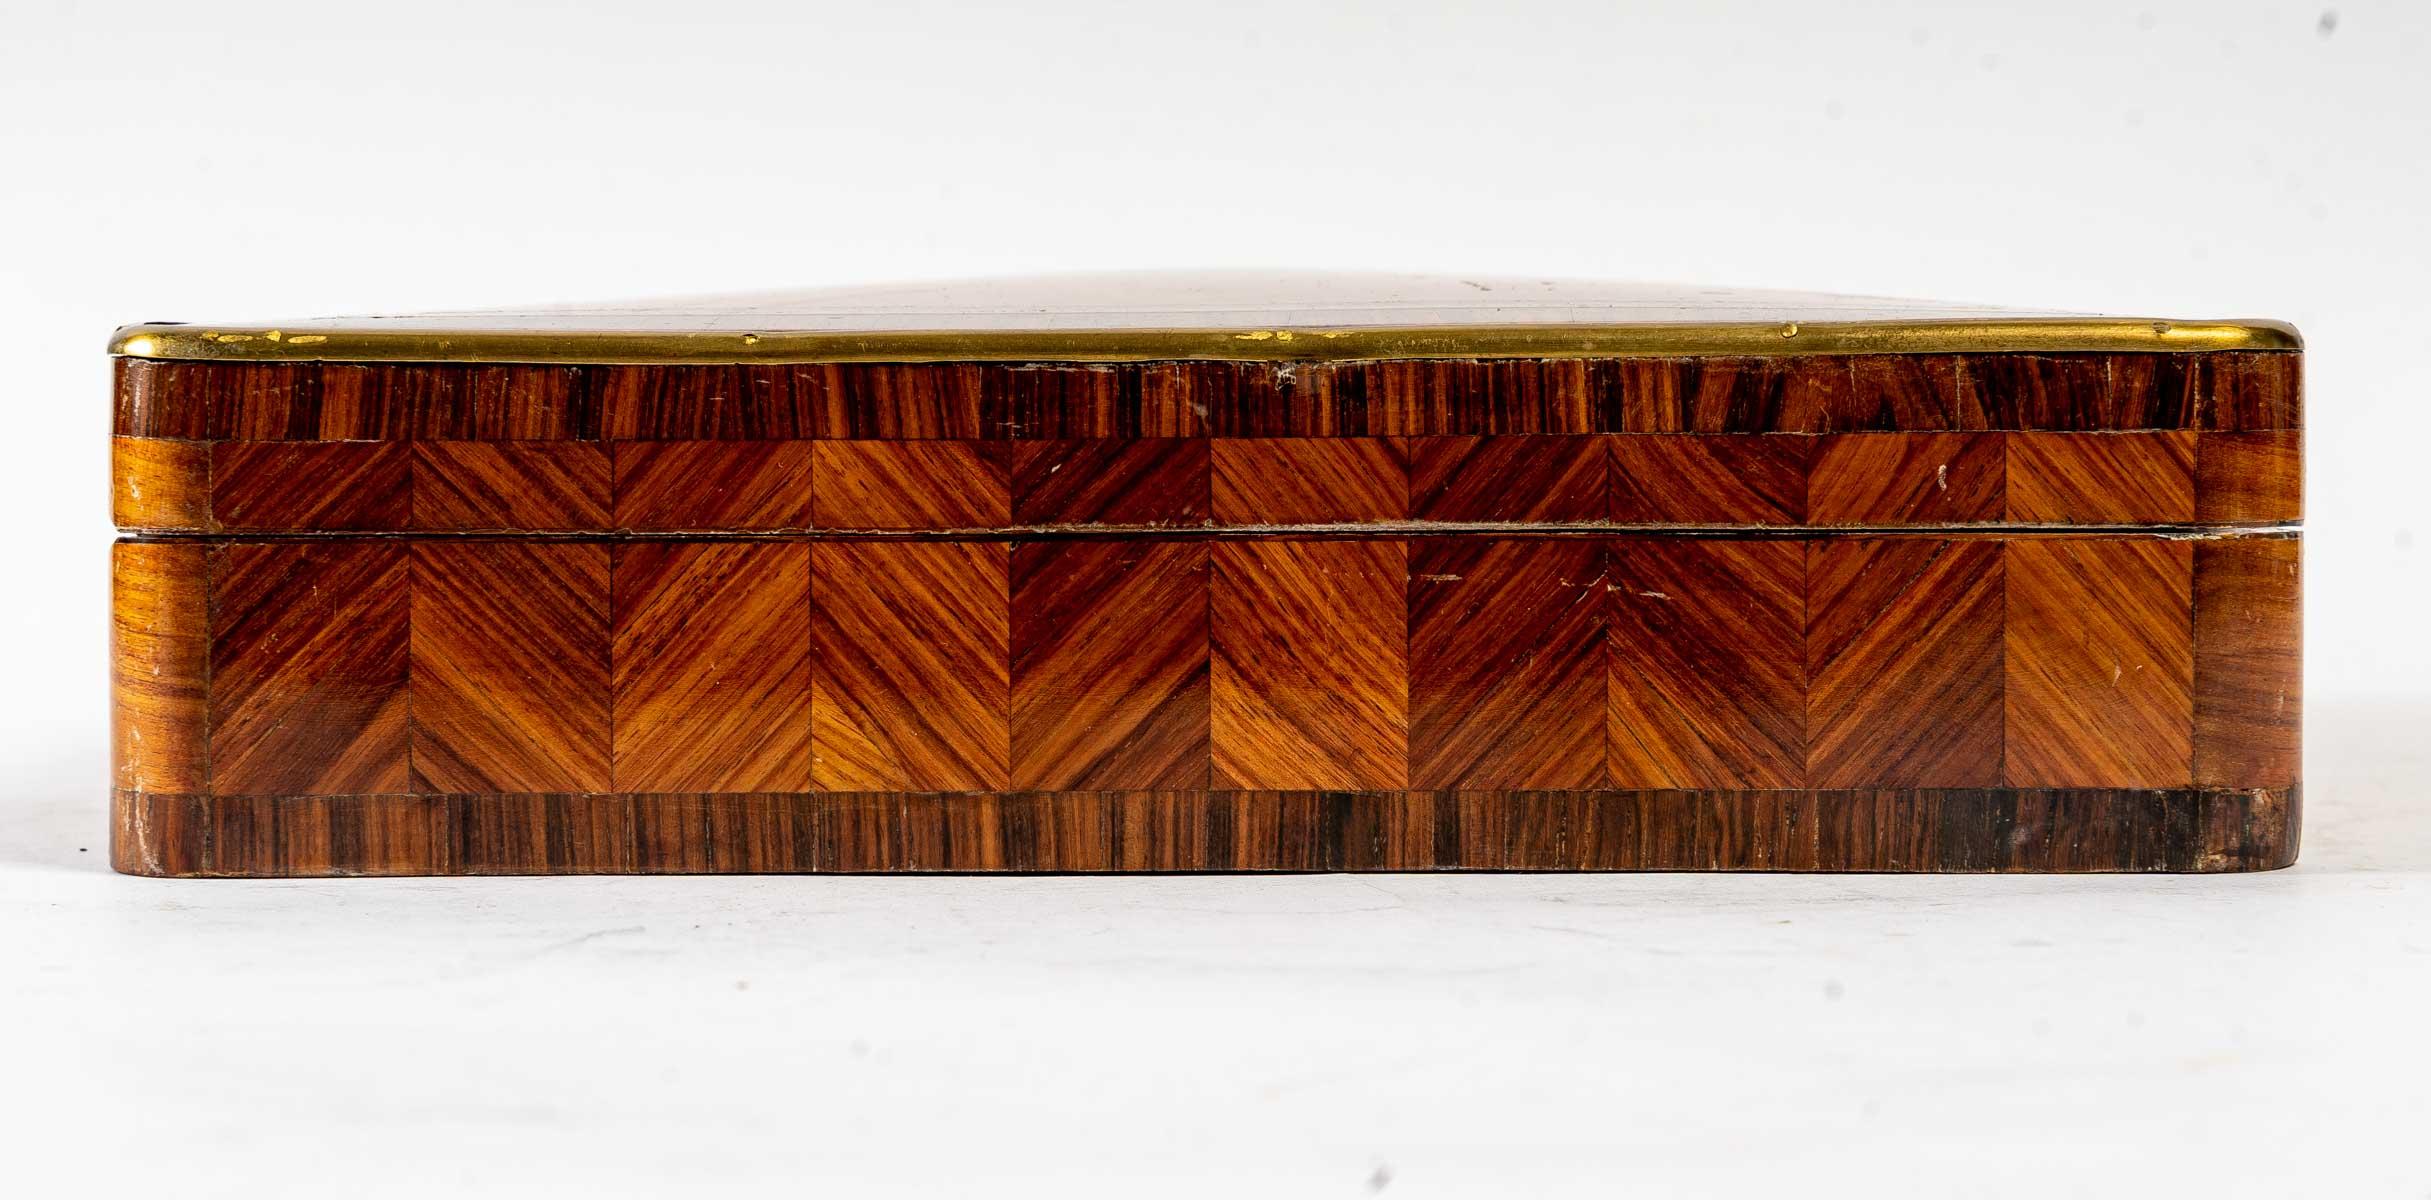 Rose and violet wood box, Louis XV style, Napoleon III period, 19th century, interior in rosewood with its original chips.
Measures: H: 6 cm, W: 31 cm, D: 23 cm.